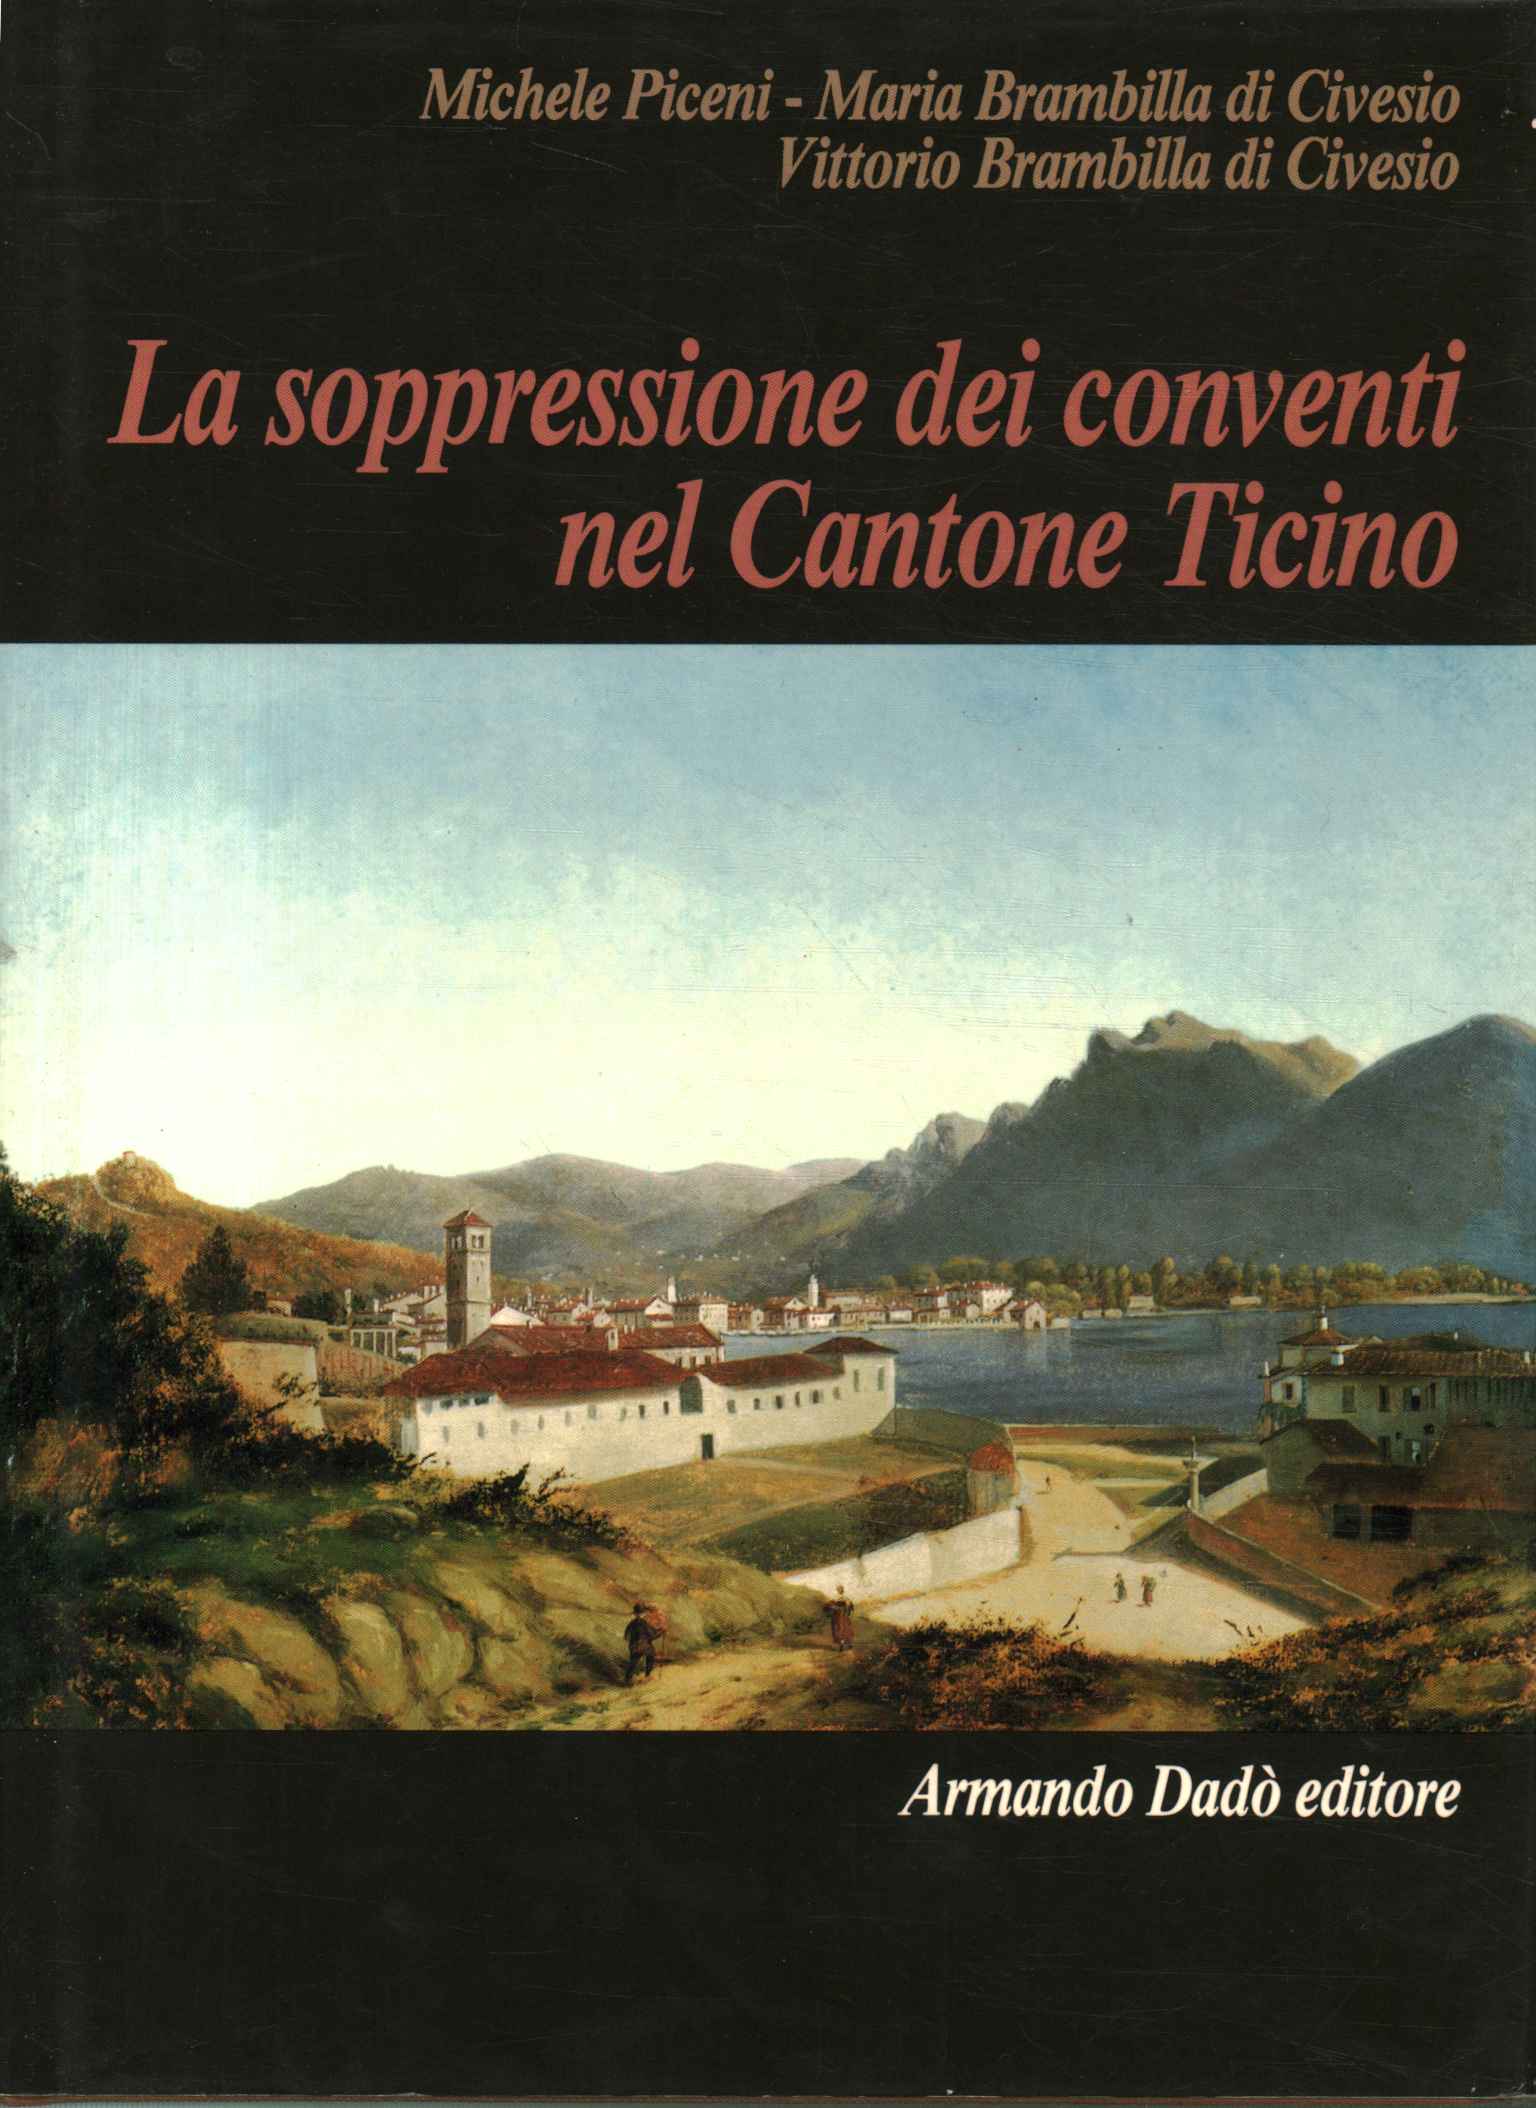 The suppression of the convents in the Canton